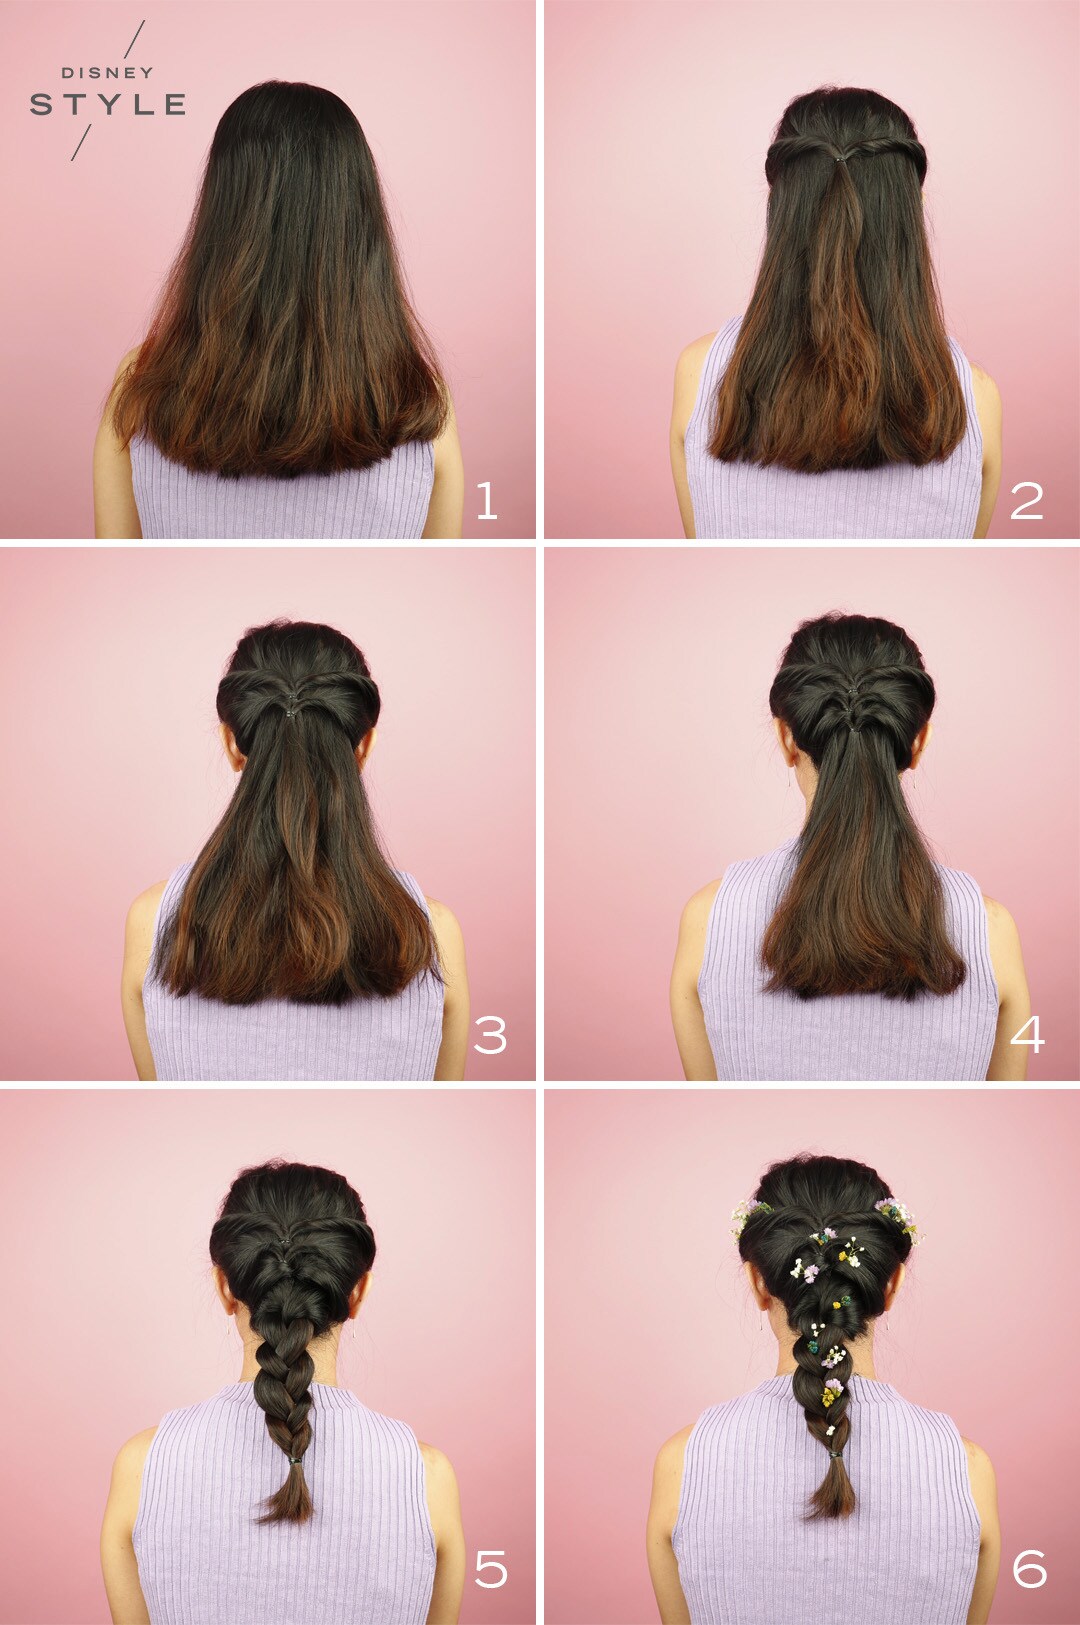 Fave4 - A Hairstyling Collection | Disney princess hairstyles, Princess  hairstyles, Hair styles